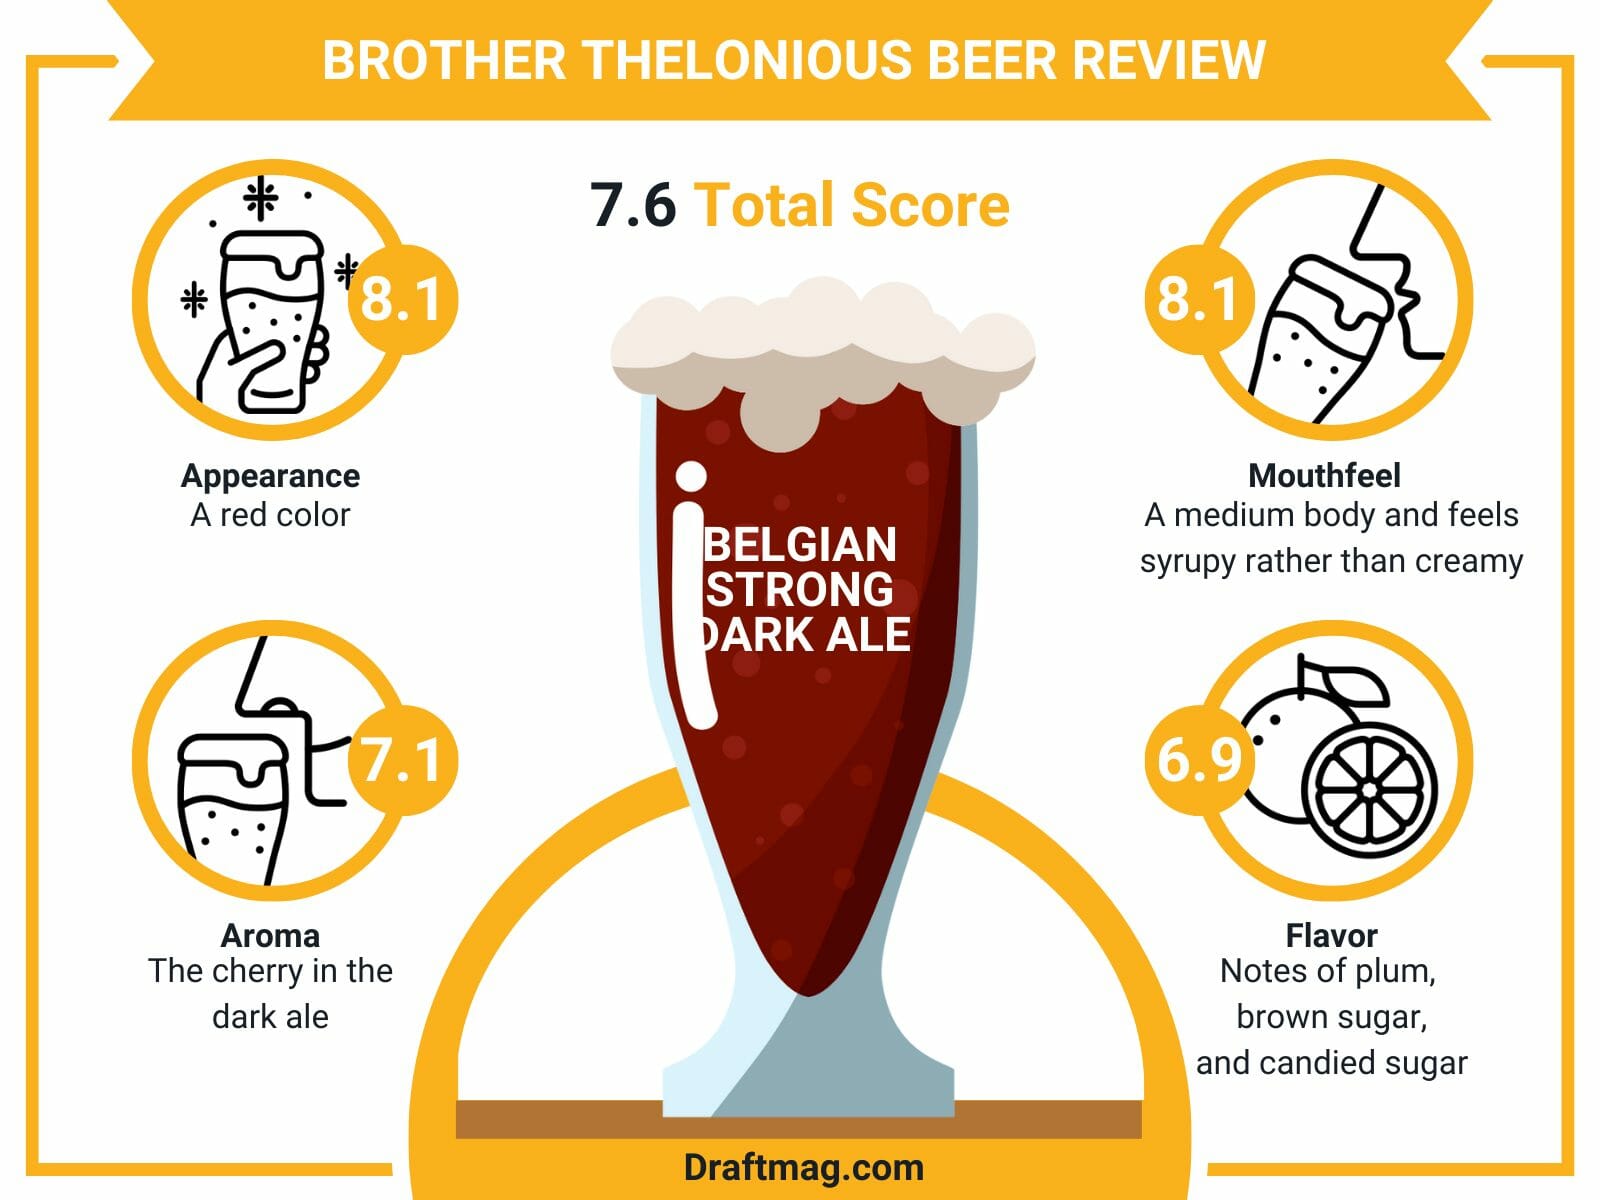 Brother thelonious beer review infographic